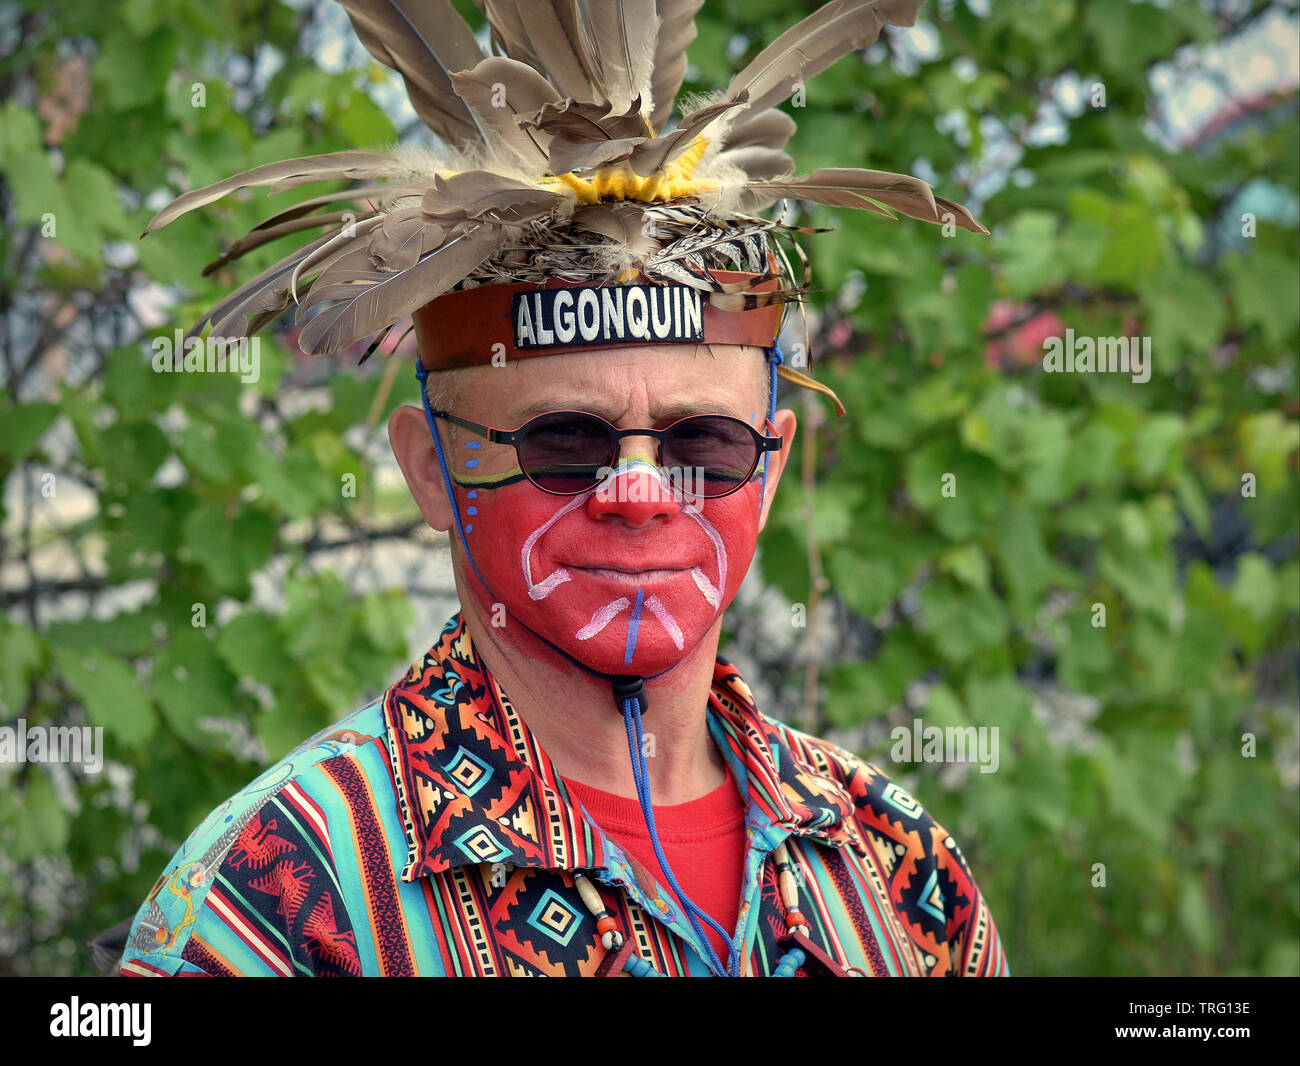 Red white and blue face paint, At the Pow Wow. Kids got the…